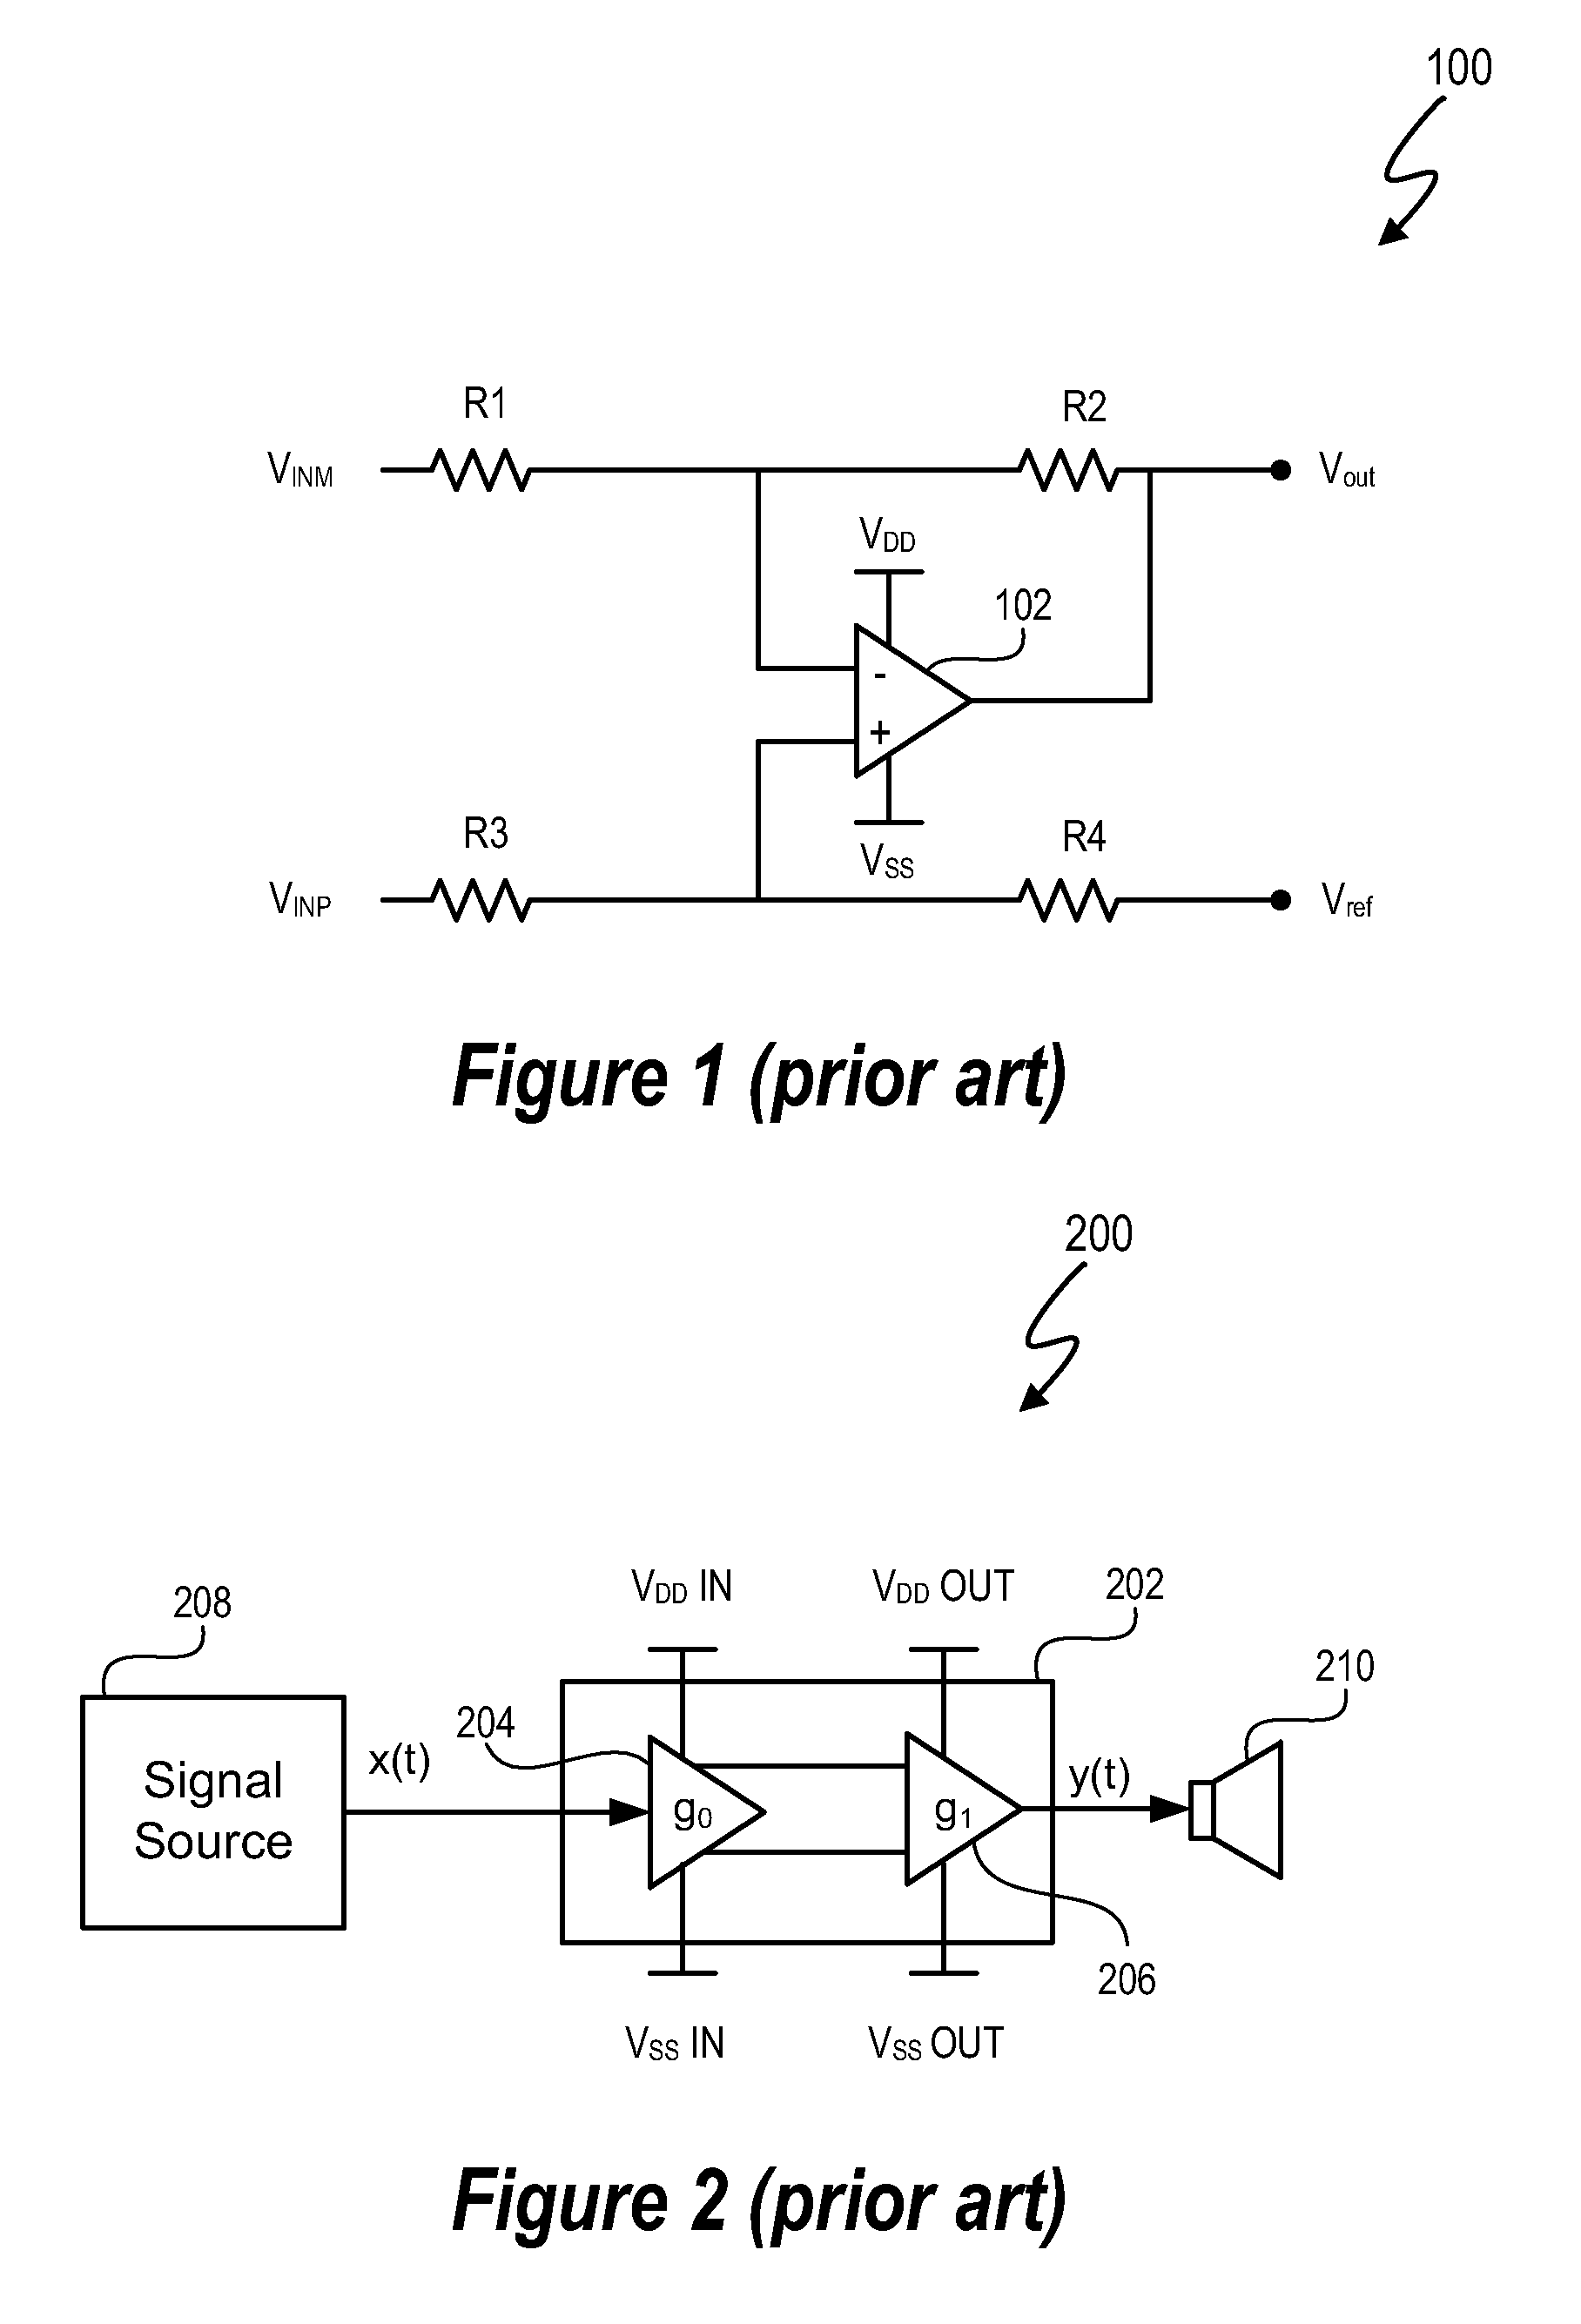 Multi-stage amplifier with multiple sets of fixed and variable voltage rails